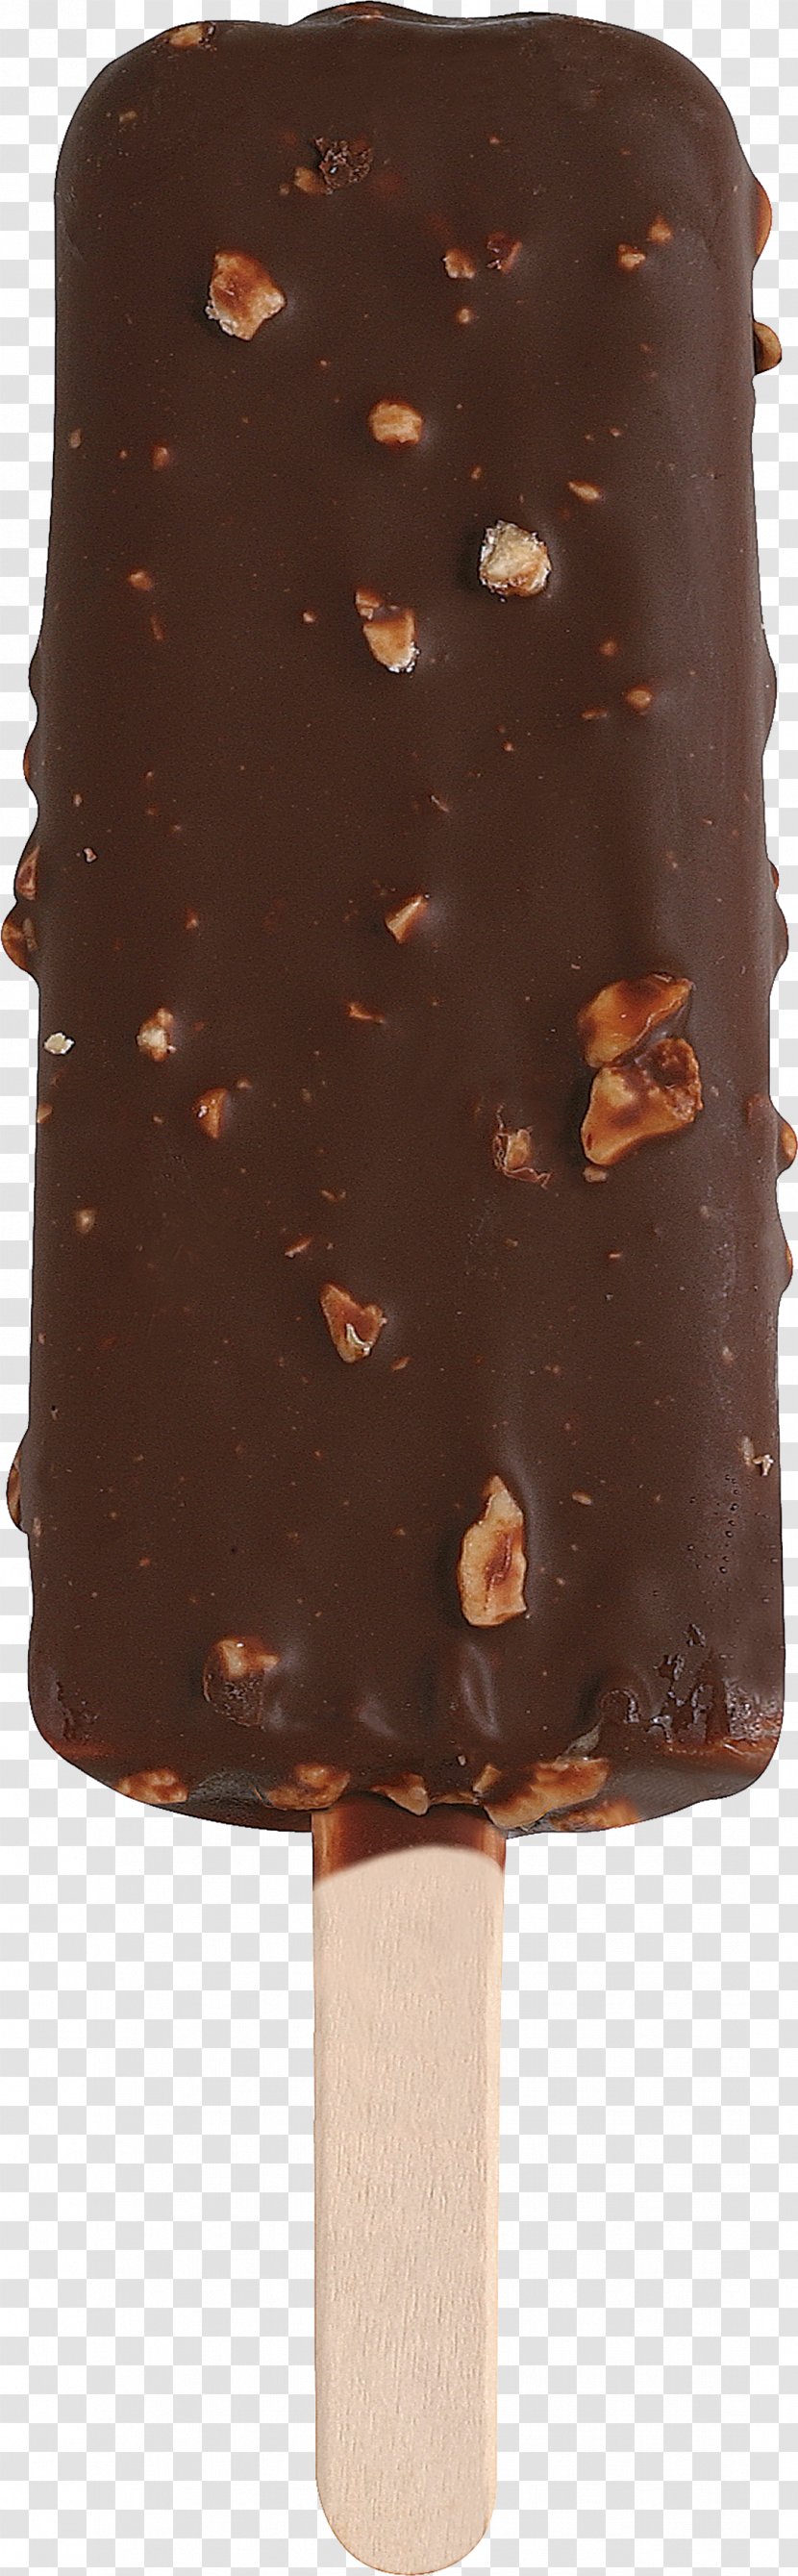 Chocolate Ice Cream Brownie Chip Cookie - Food - Image Transparent PNG